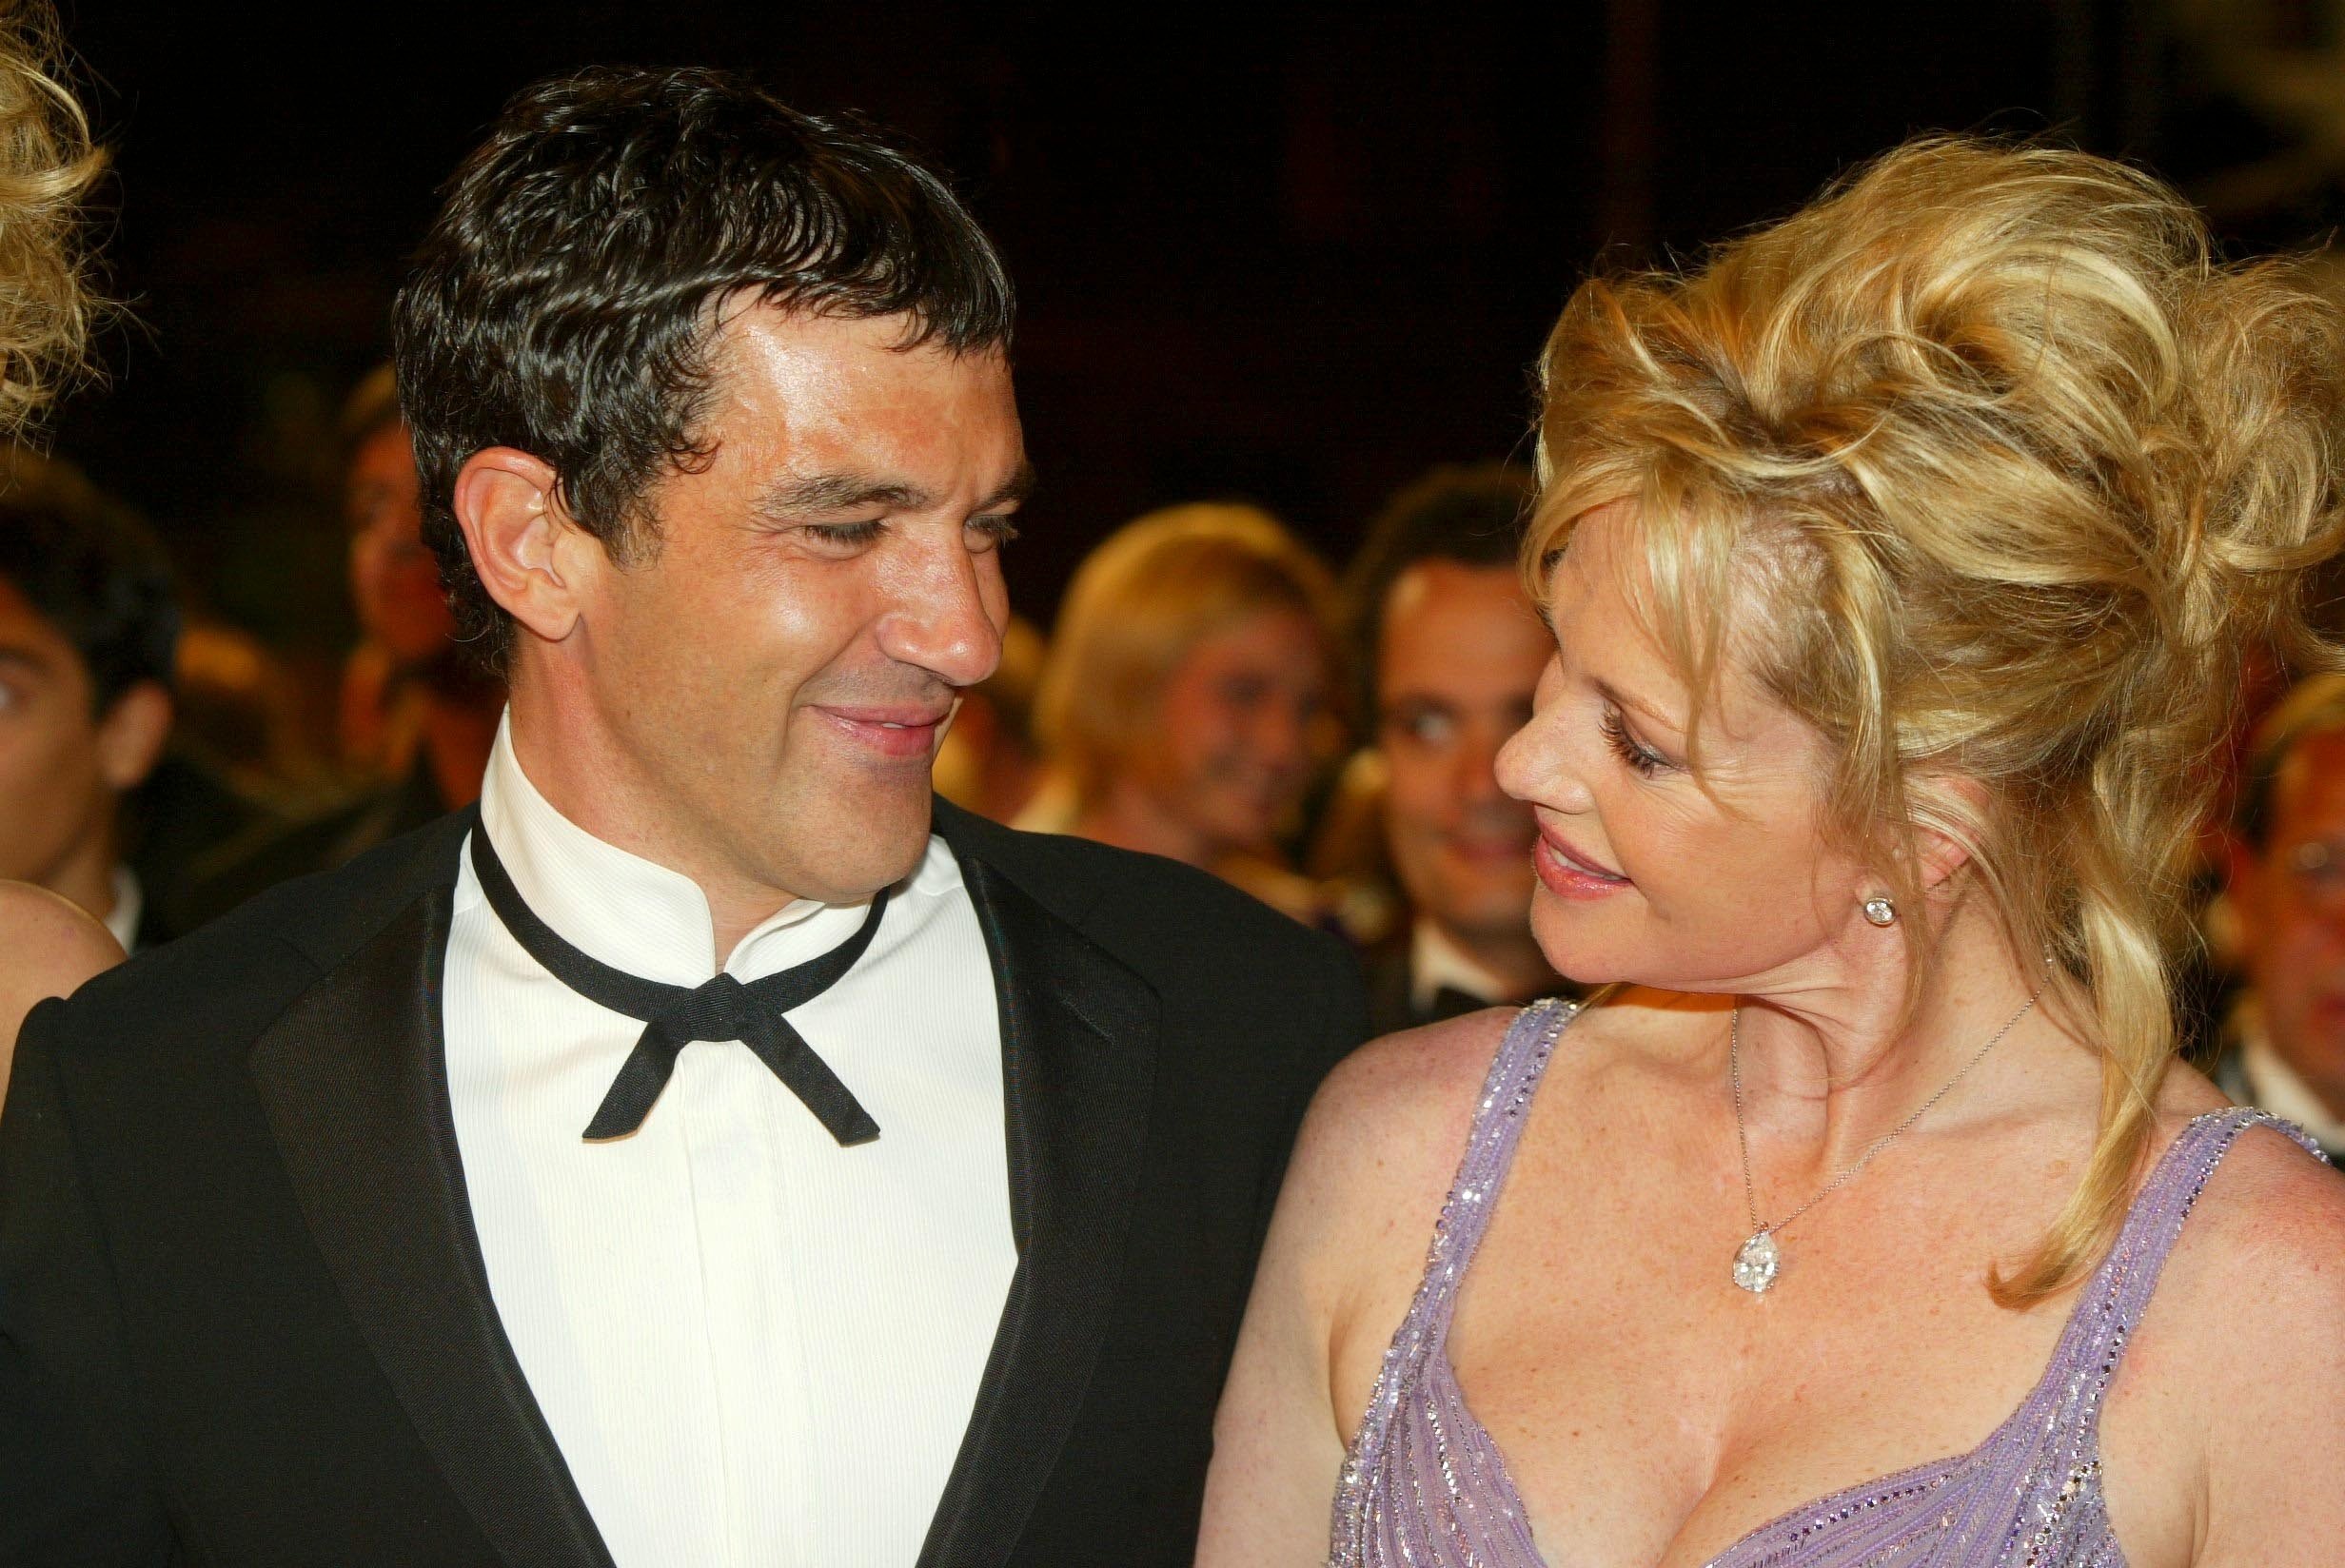 Antonio Banderas and Melanie Griffith during the 55th Cannes film festival: Stairs of 